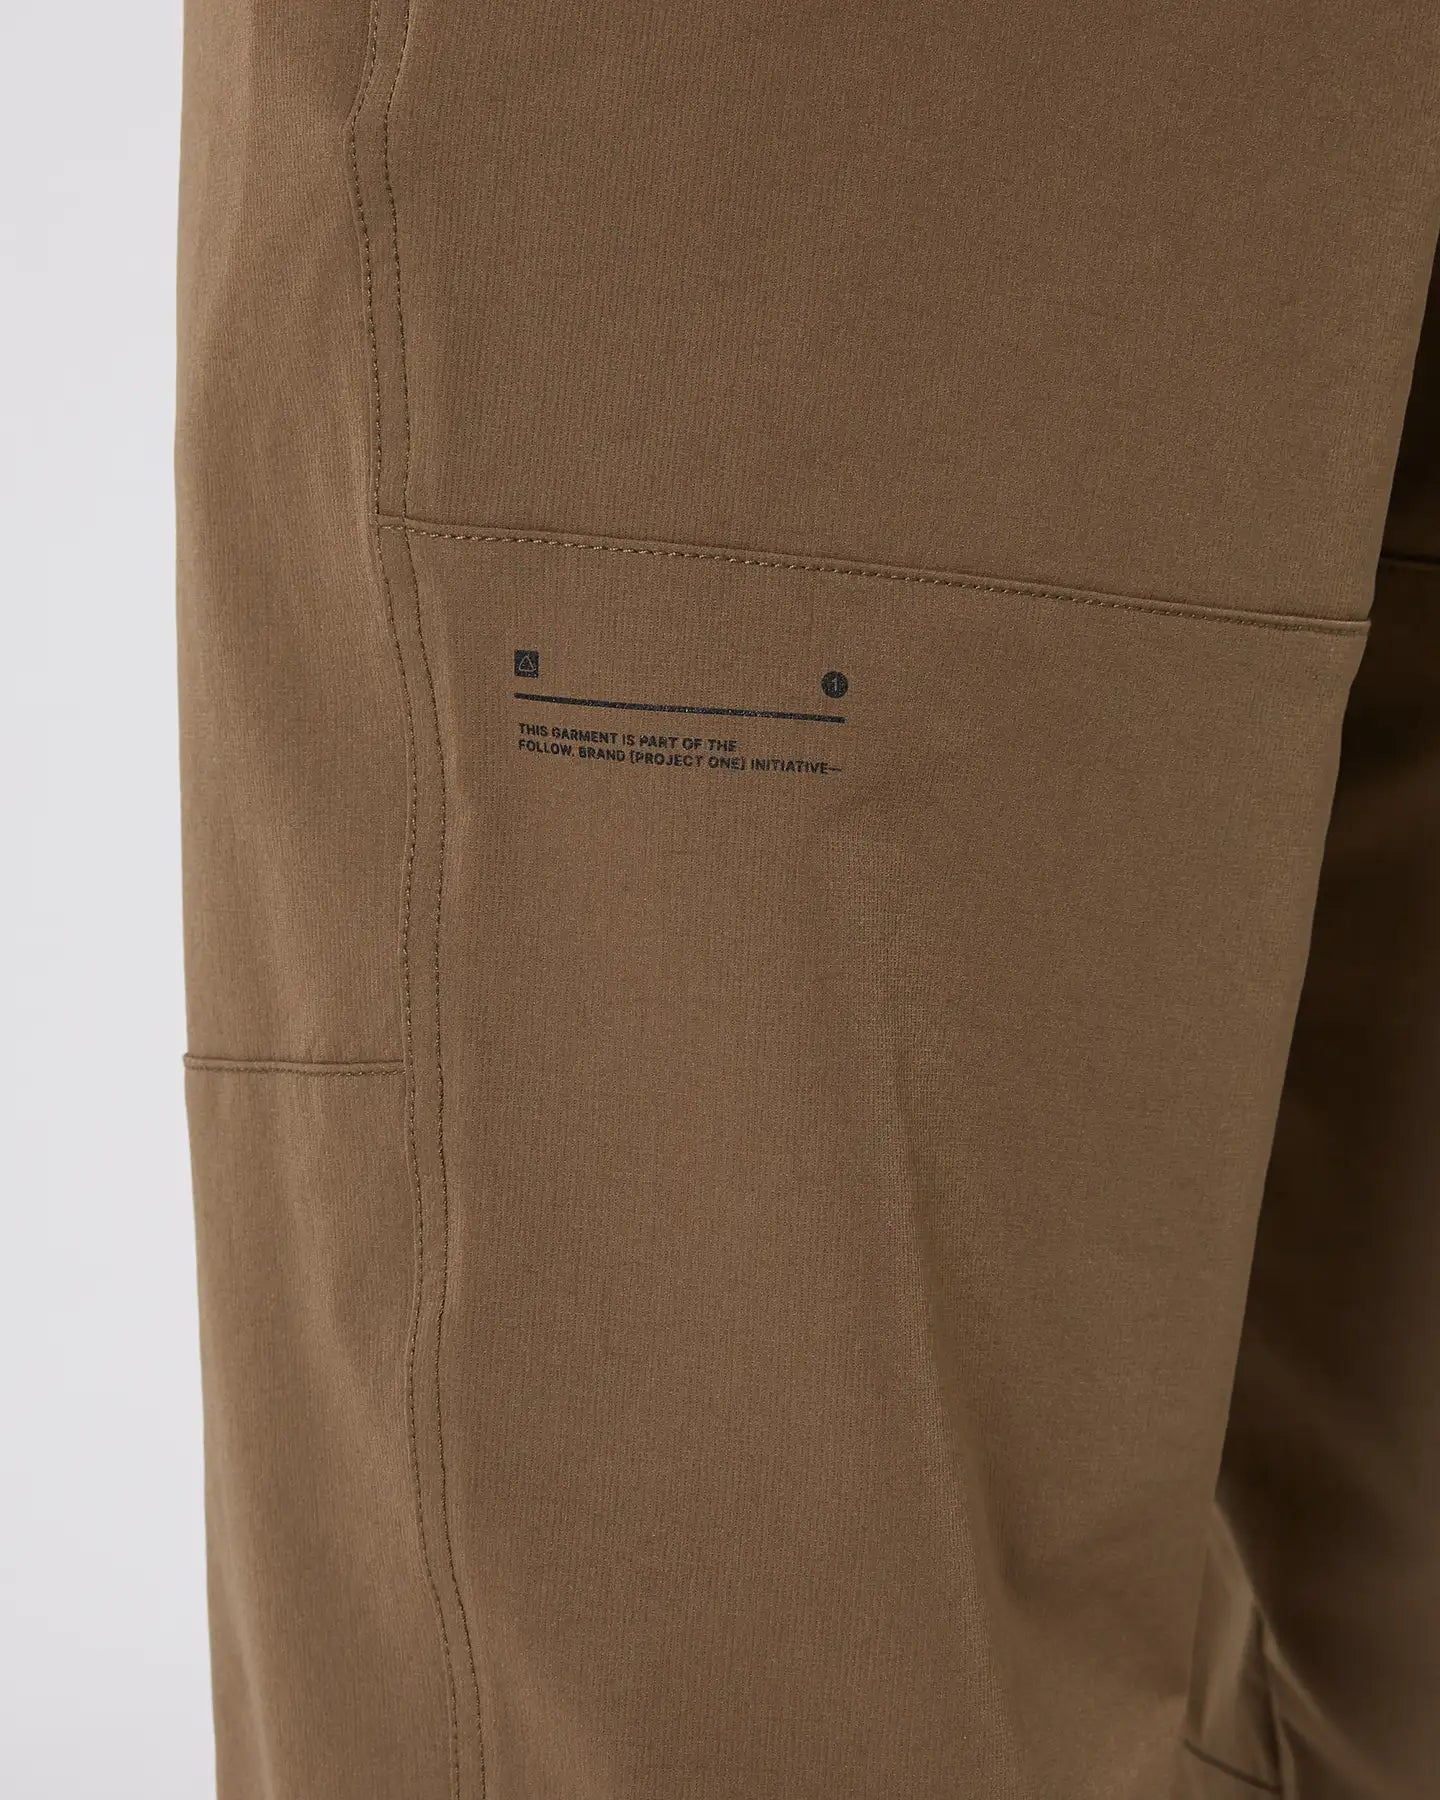 Follow All Day Pants - Deep Taupe 8